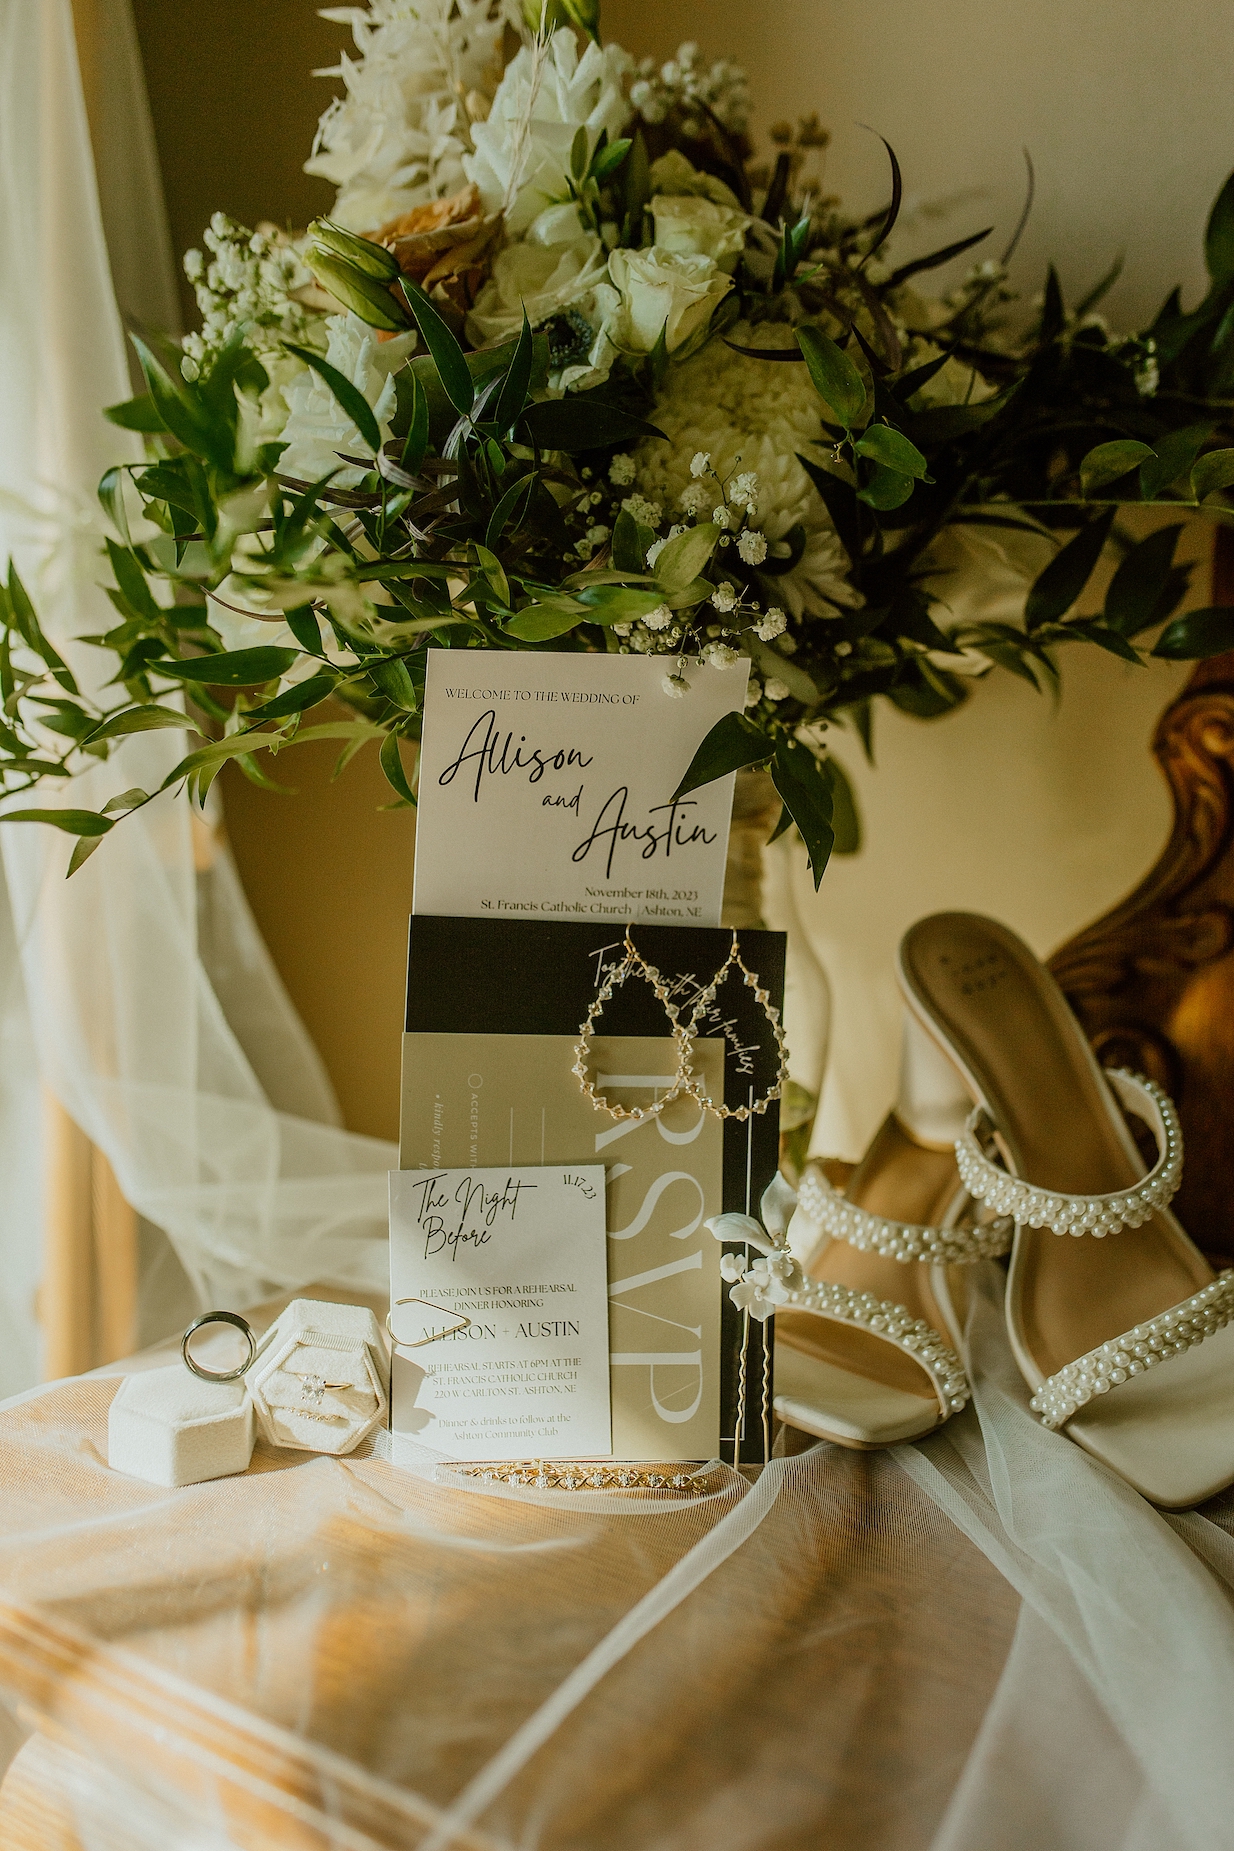 items from the special wedding day shown in a photo for their wedding album